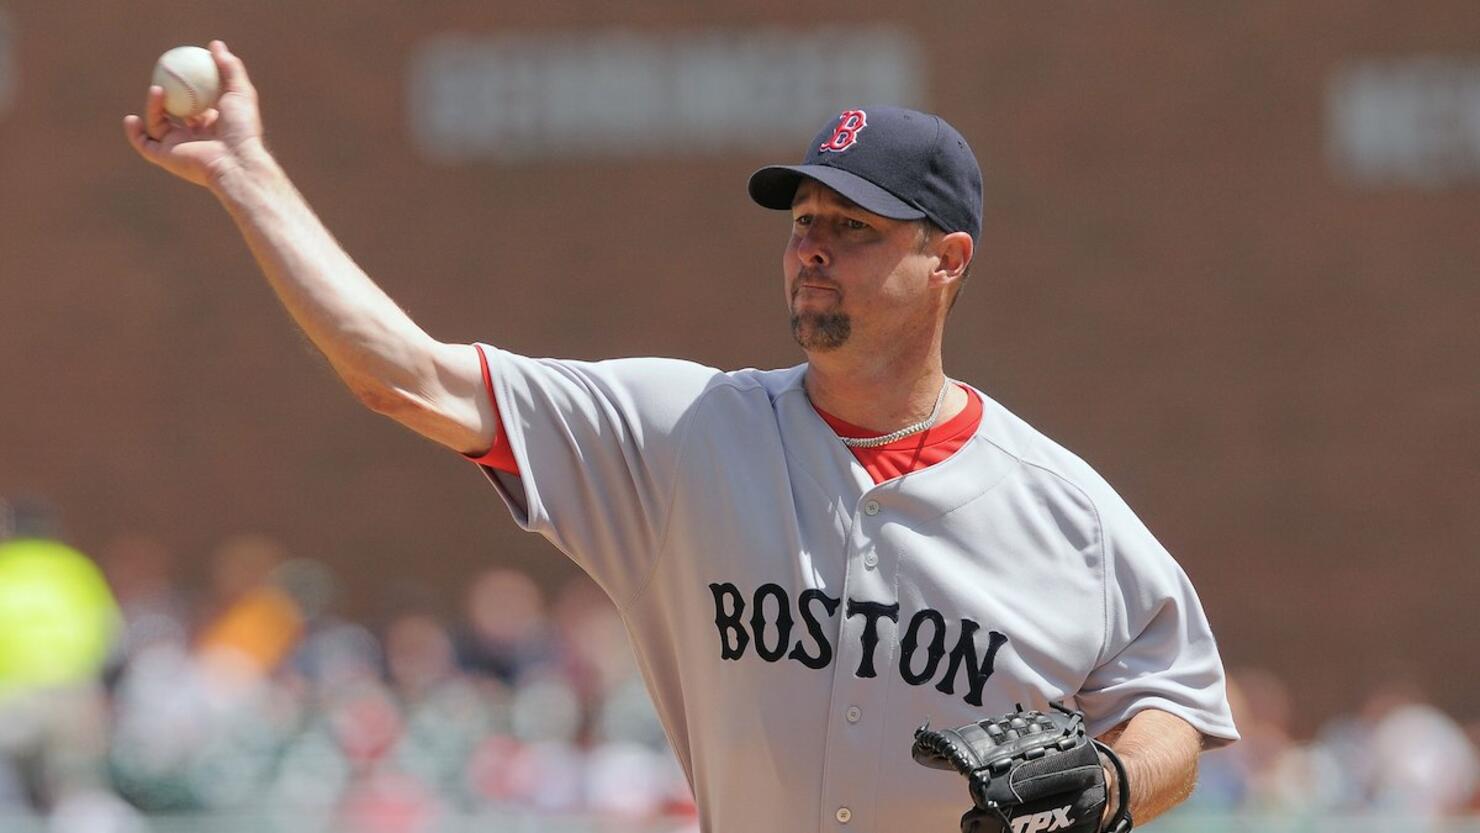 Tim Wakefield, beloved Red Sox pitcher and broadcaster, passes away